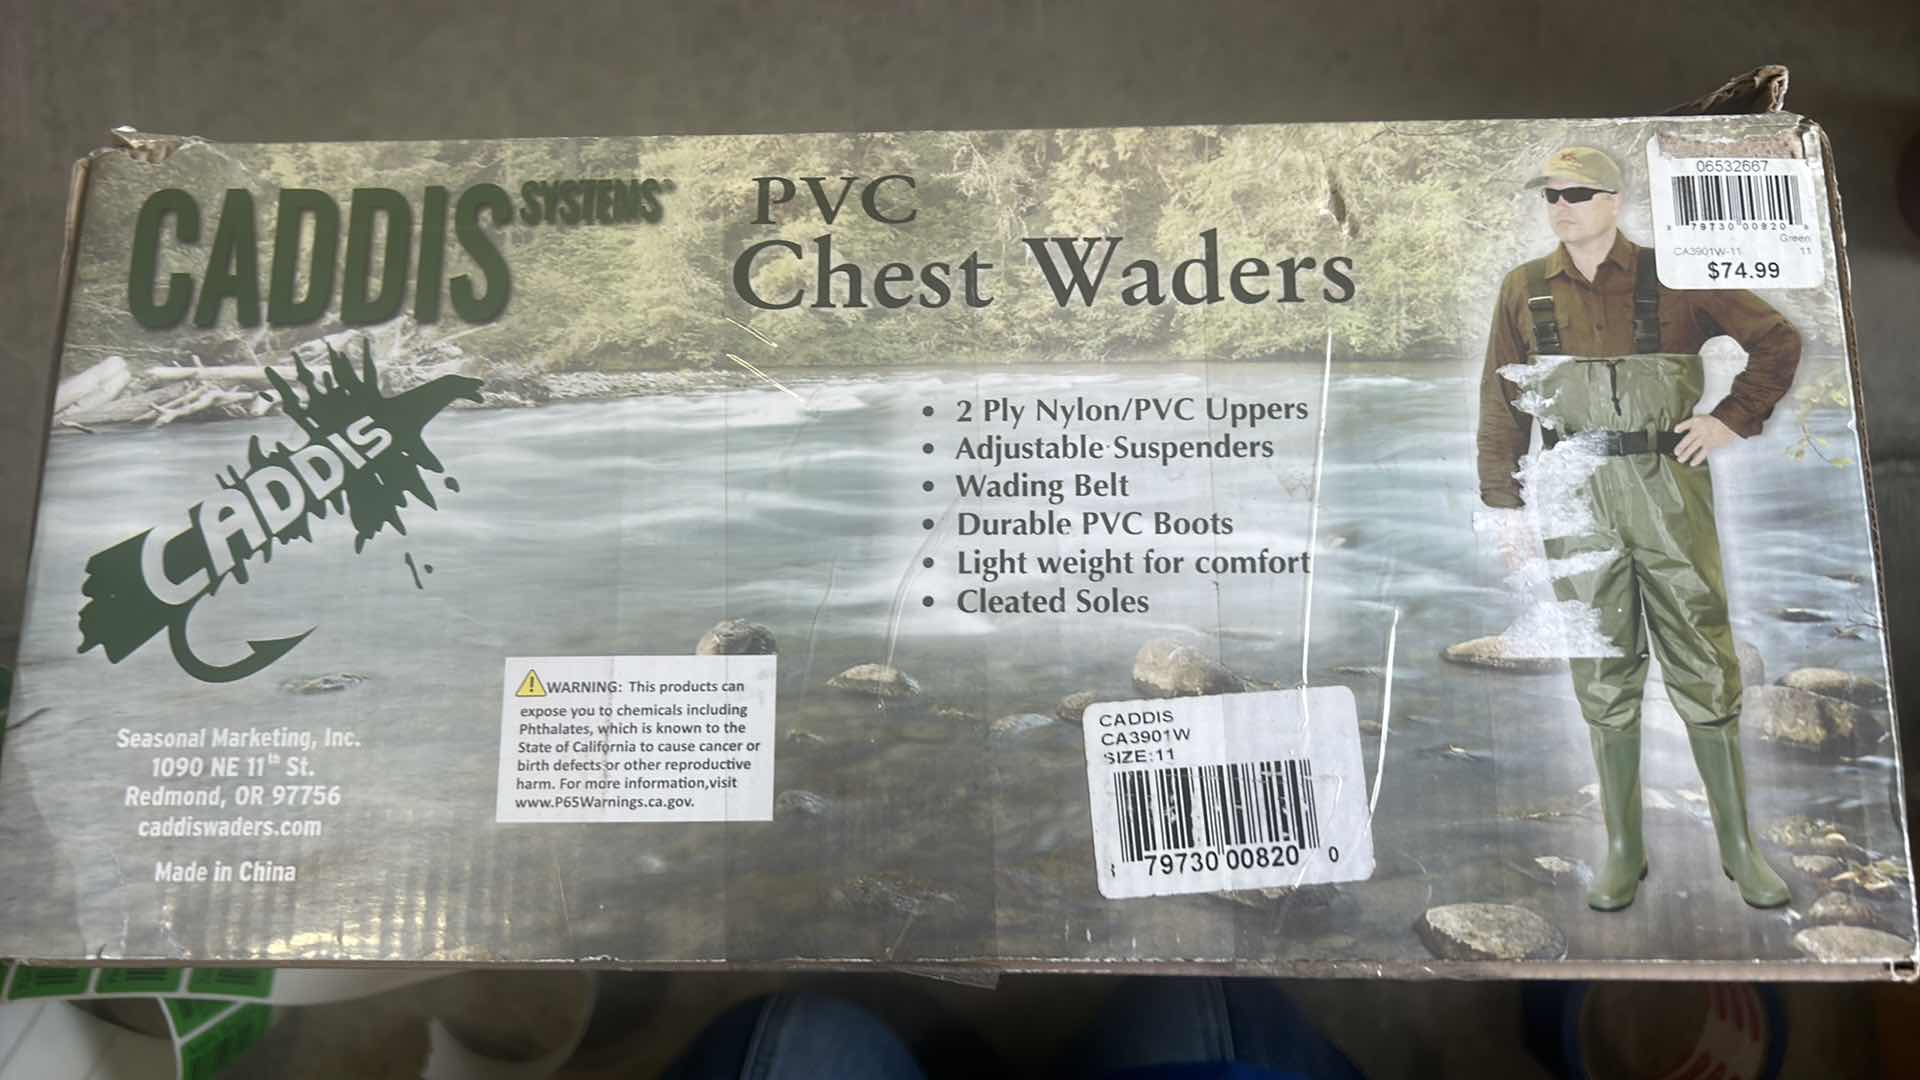 Photo 1 of CADDIS PVC CHEST WADERS $75 SIZE 11